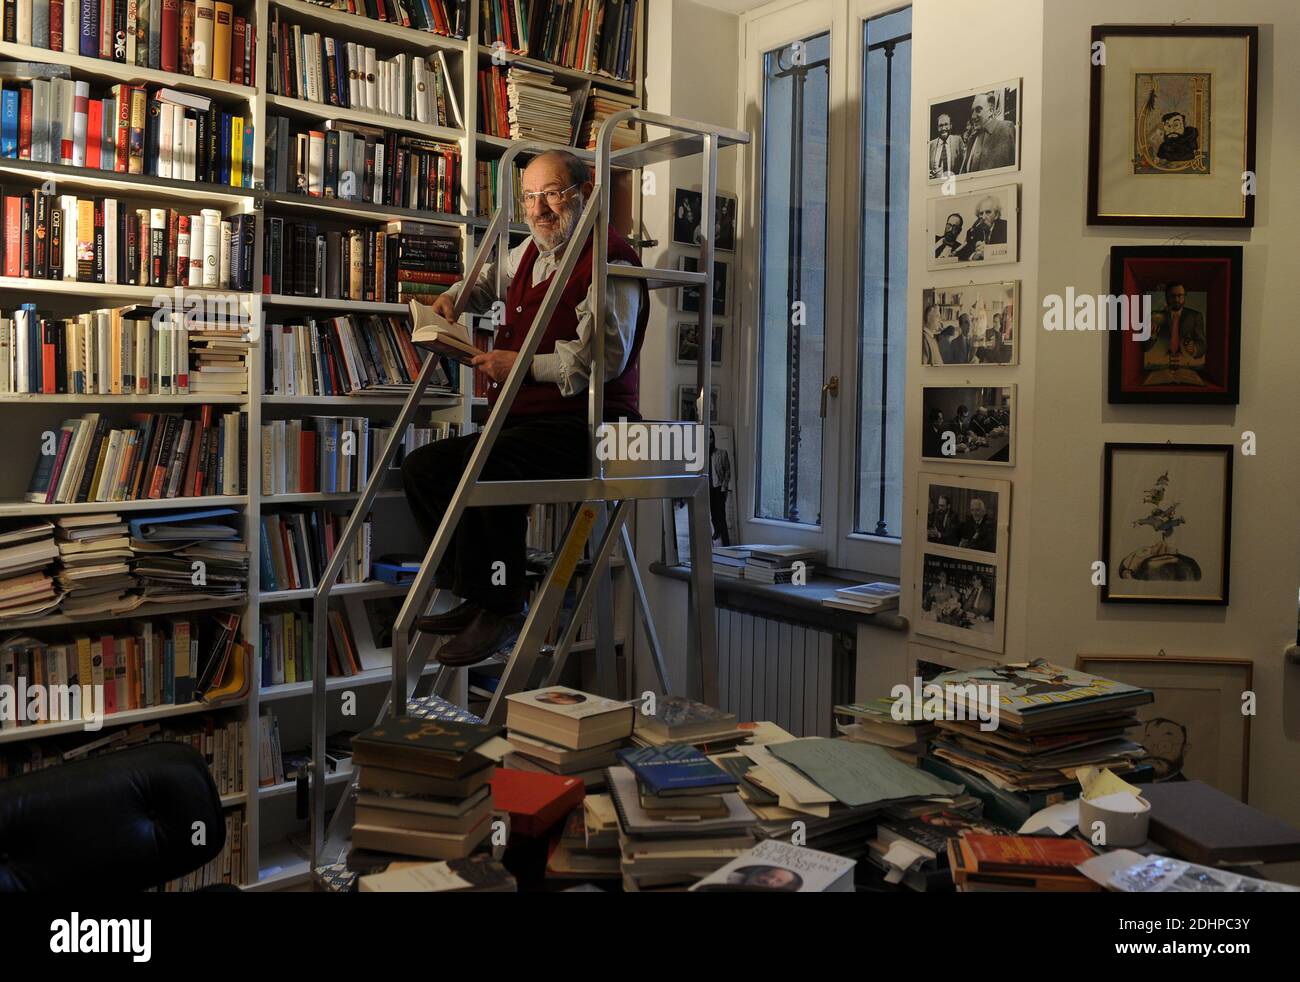 https://c8.alamy.com/comp/2DHPC3Y/file-photo-italian-writer-umberto-eco-at-home-in-milan-italy-on-march-6-2014-eco-best-known-for-his-novel-the-name-of-the-rose-has-died-aged-84-his-family-says-he-passed-away-late-on-friday-at-his-home-the-name-of-the-rose-was-made-into-a-film-in-1989-starring-scottish-actor-sean-connery-eco-who-also-wrote-the-novel-foucaults-pendulum-continued-to-publish-new-works-with-year-zero-released-last-year-photo-by-eric-vandevilleabacapresscom-2DHPC3Y.jpg